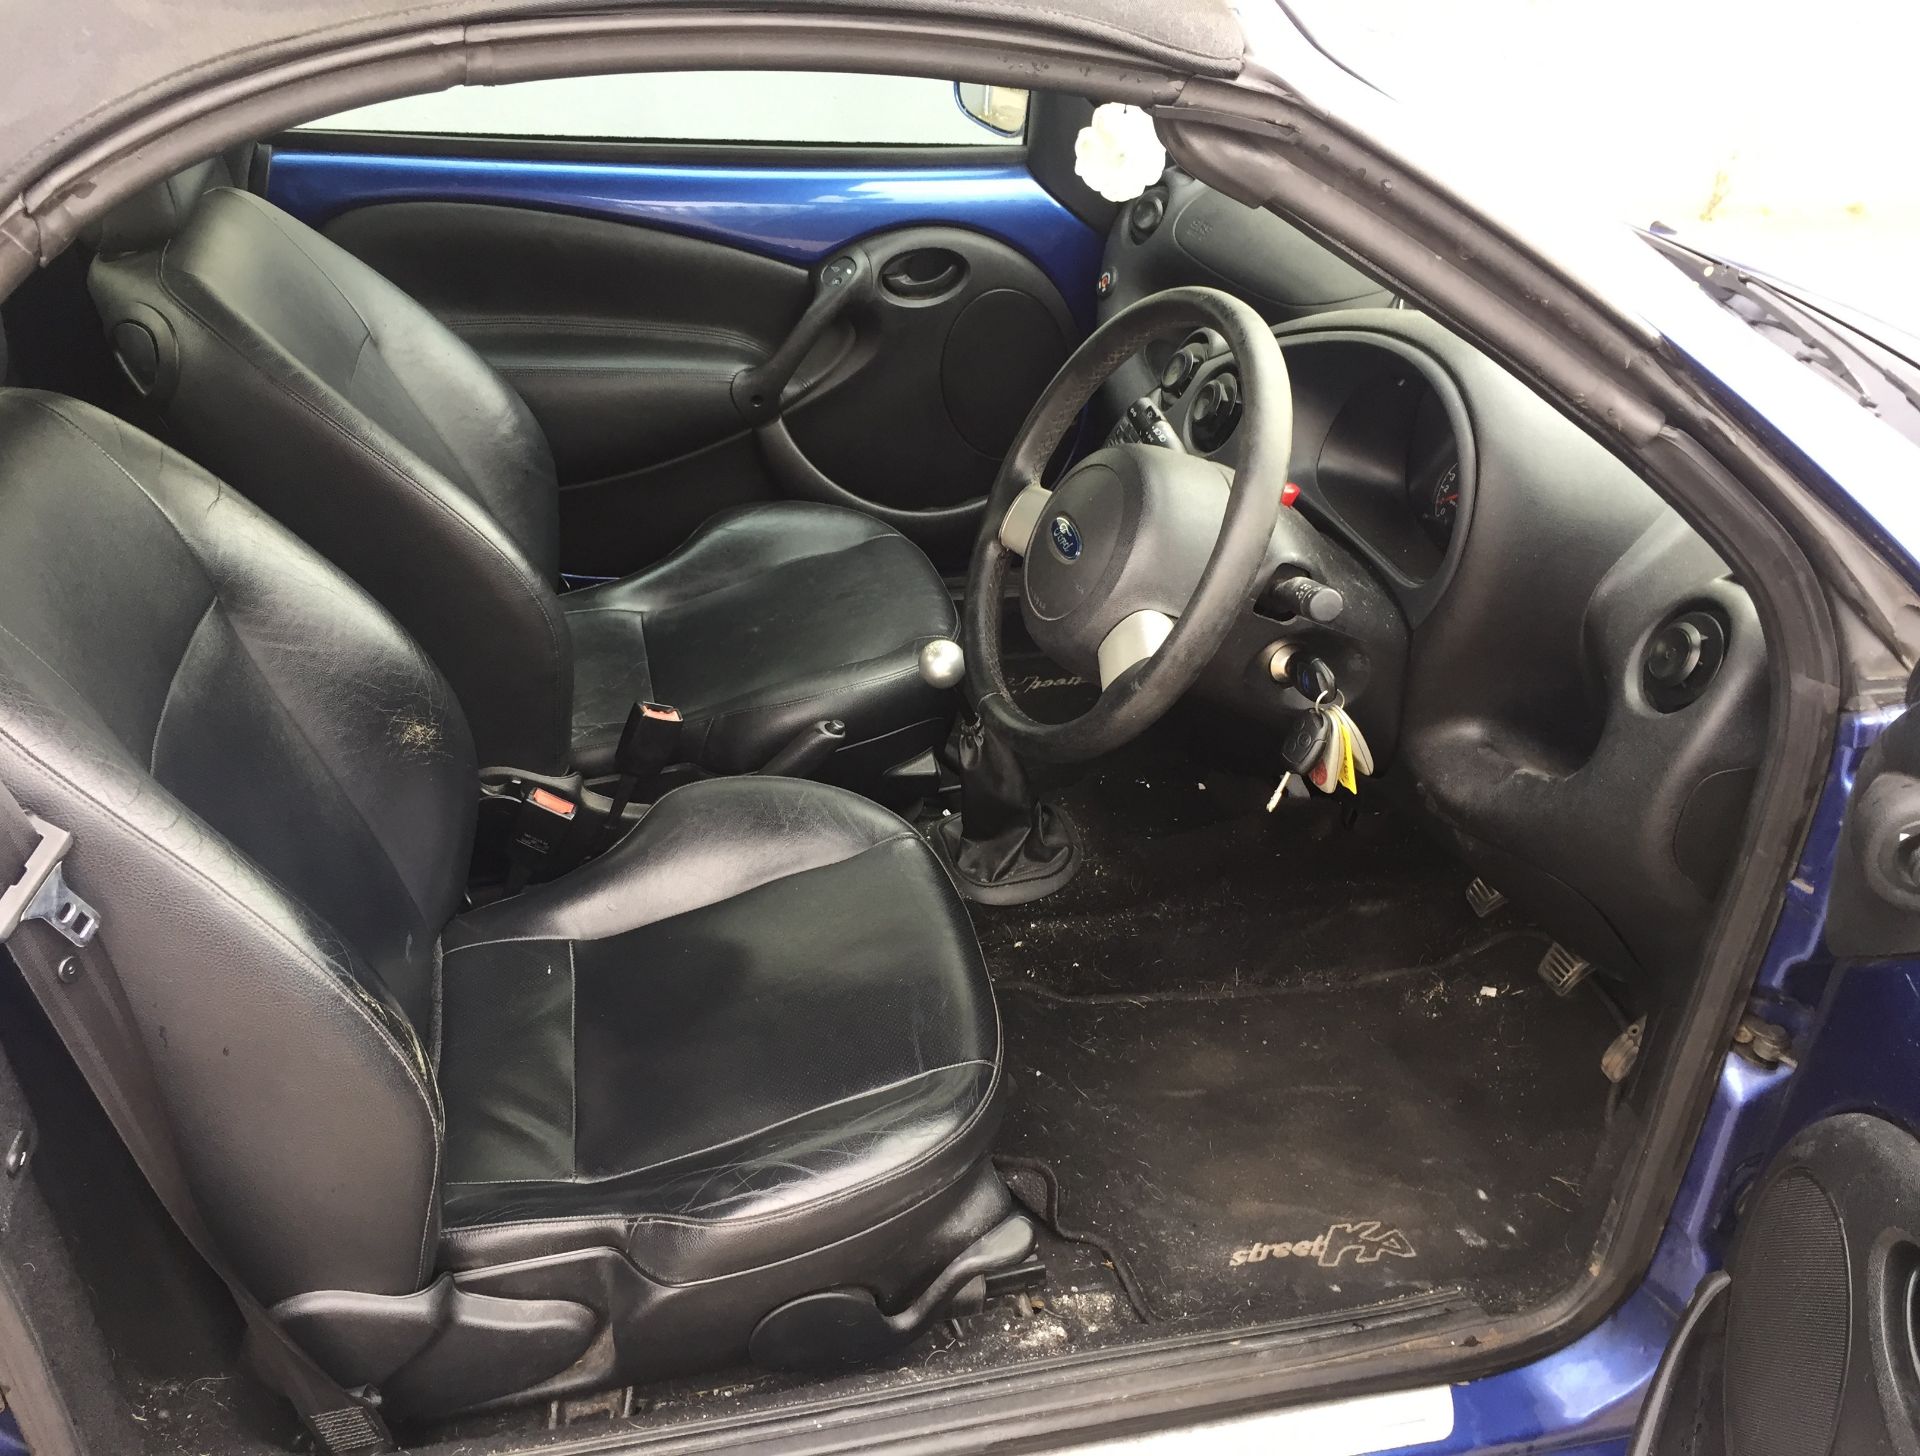 2003 Ford Streetka Luxury 1.3 2 Door Convertible - CL505 - NO VAT ON THE HAMMER - Location: Corby, N - Image 7 of 11